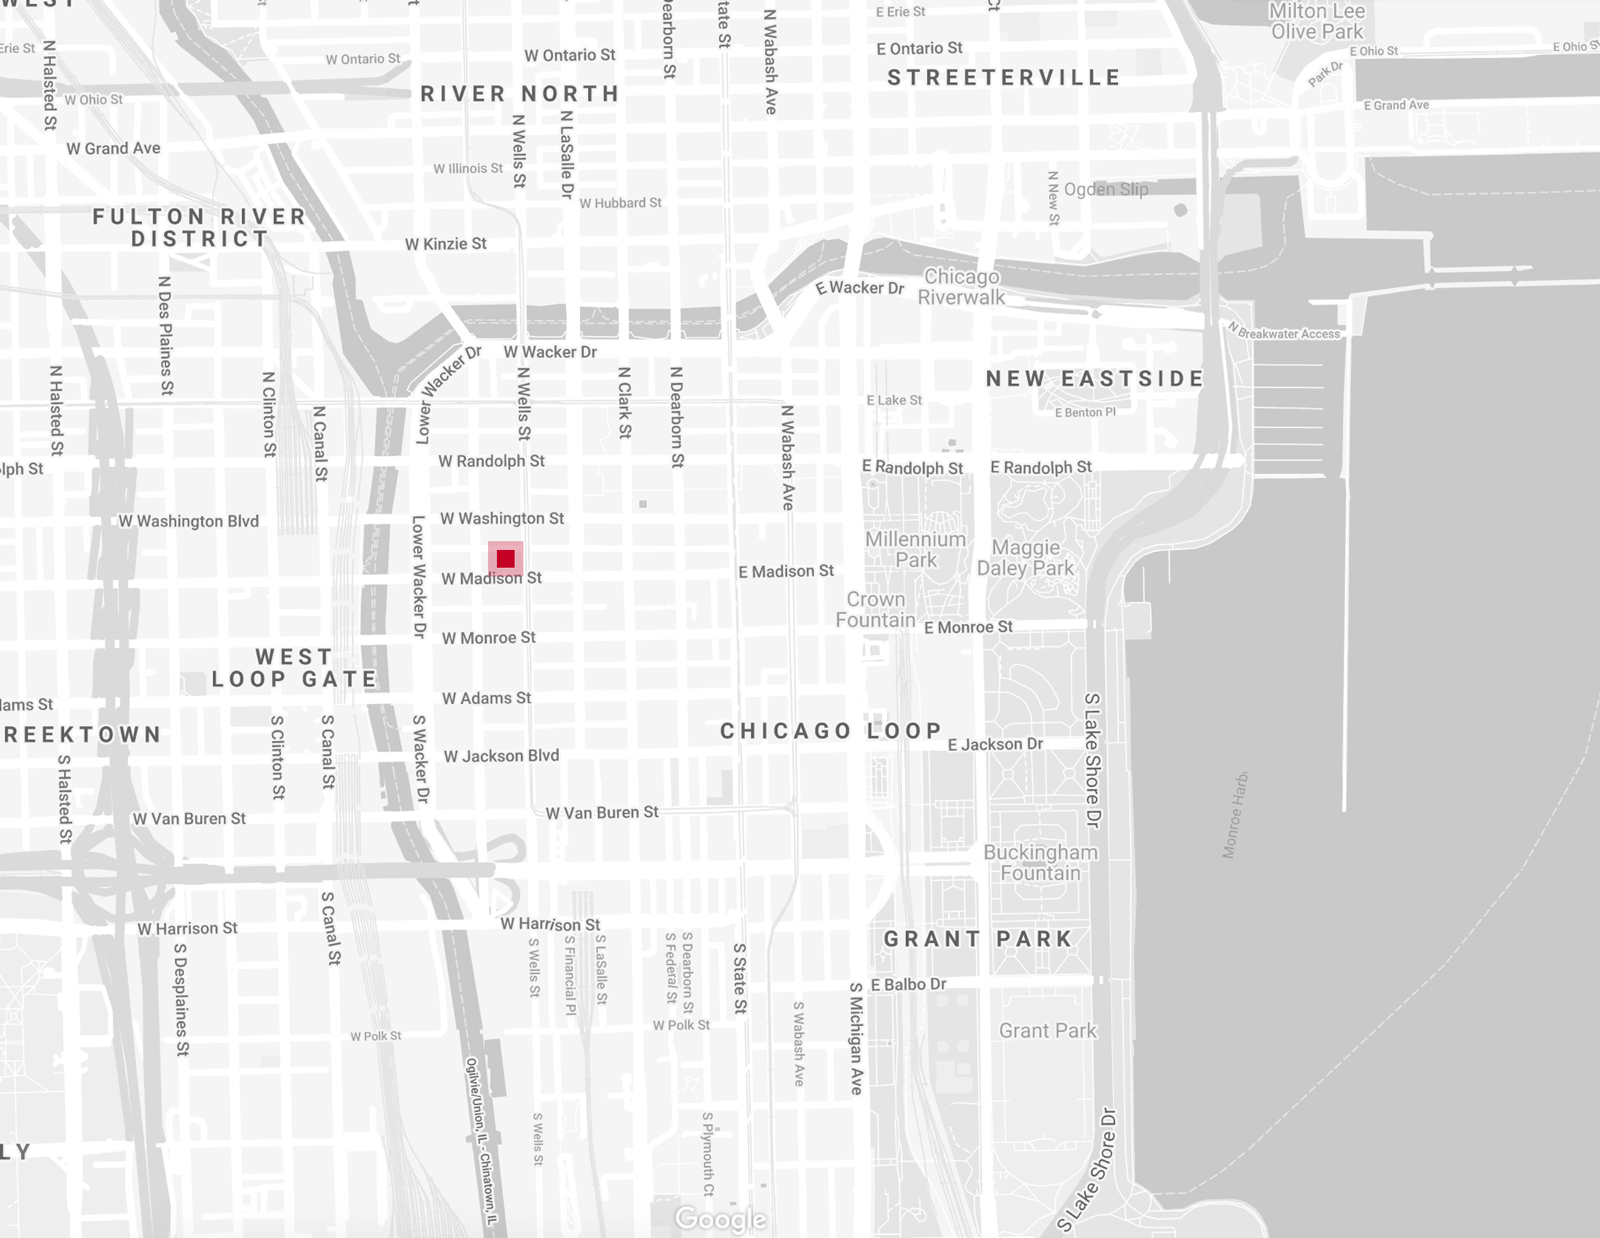 map of valenti office location